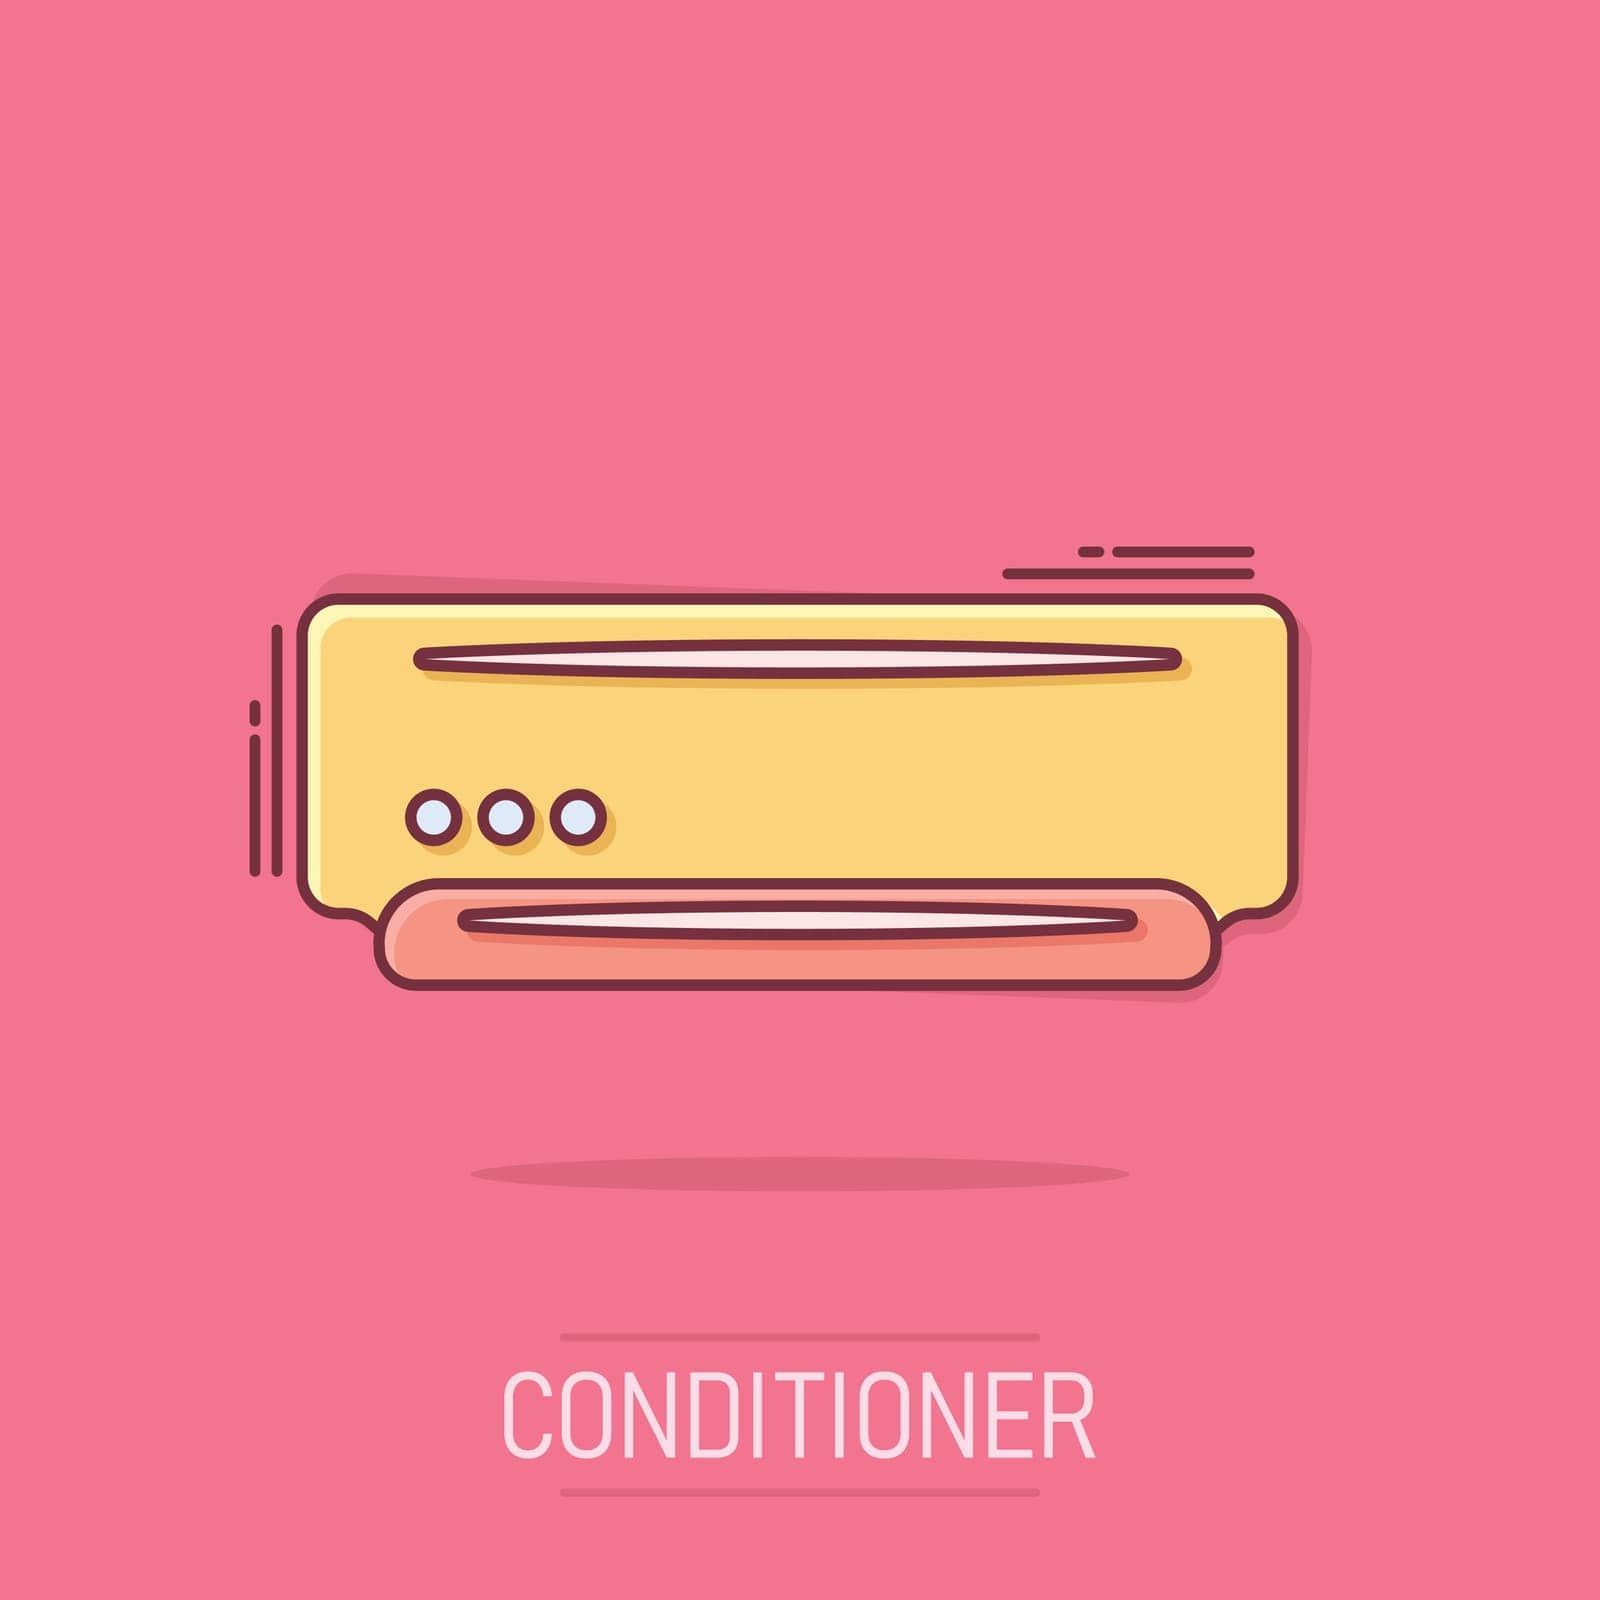 Conditioner icon in comic style. Cooler cartoon vector illustration on isolated background. Cold climate splash effect business concept. by LysenkoA